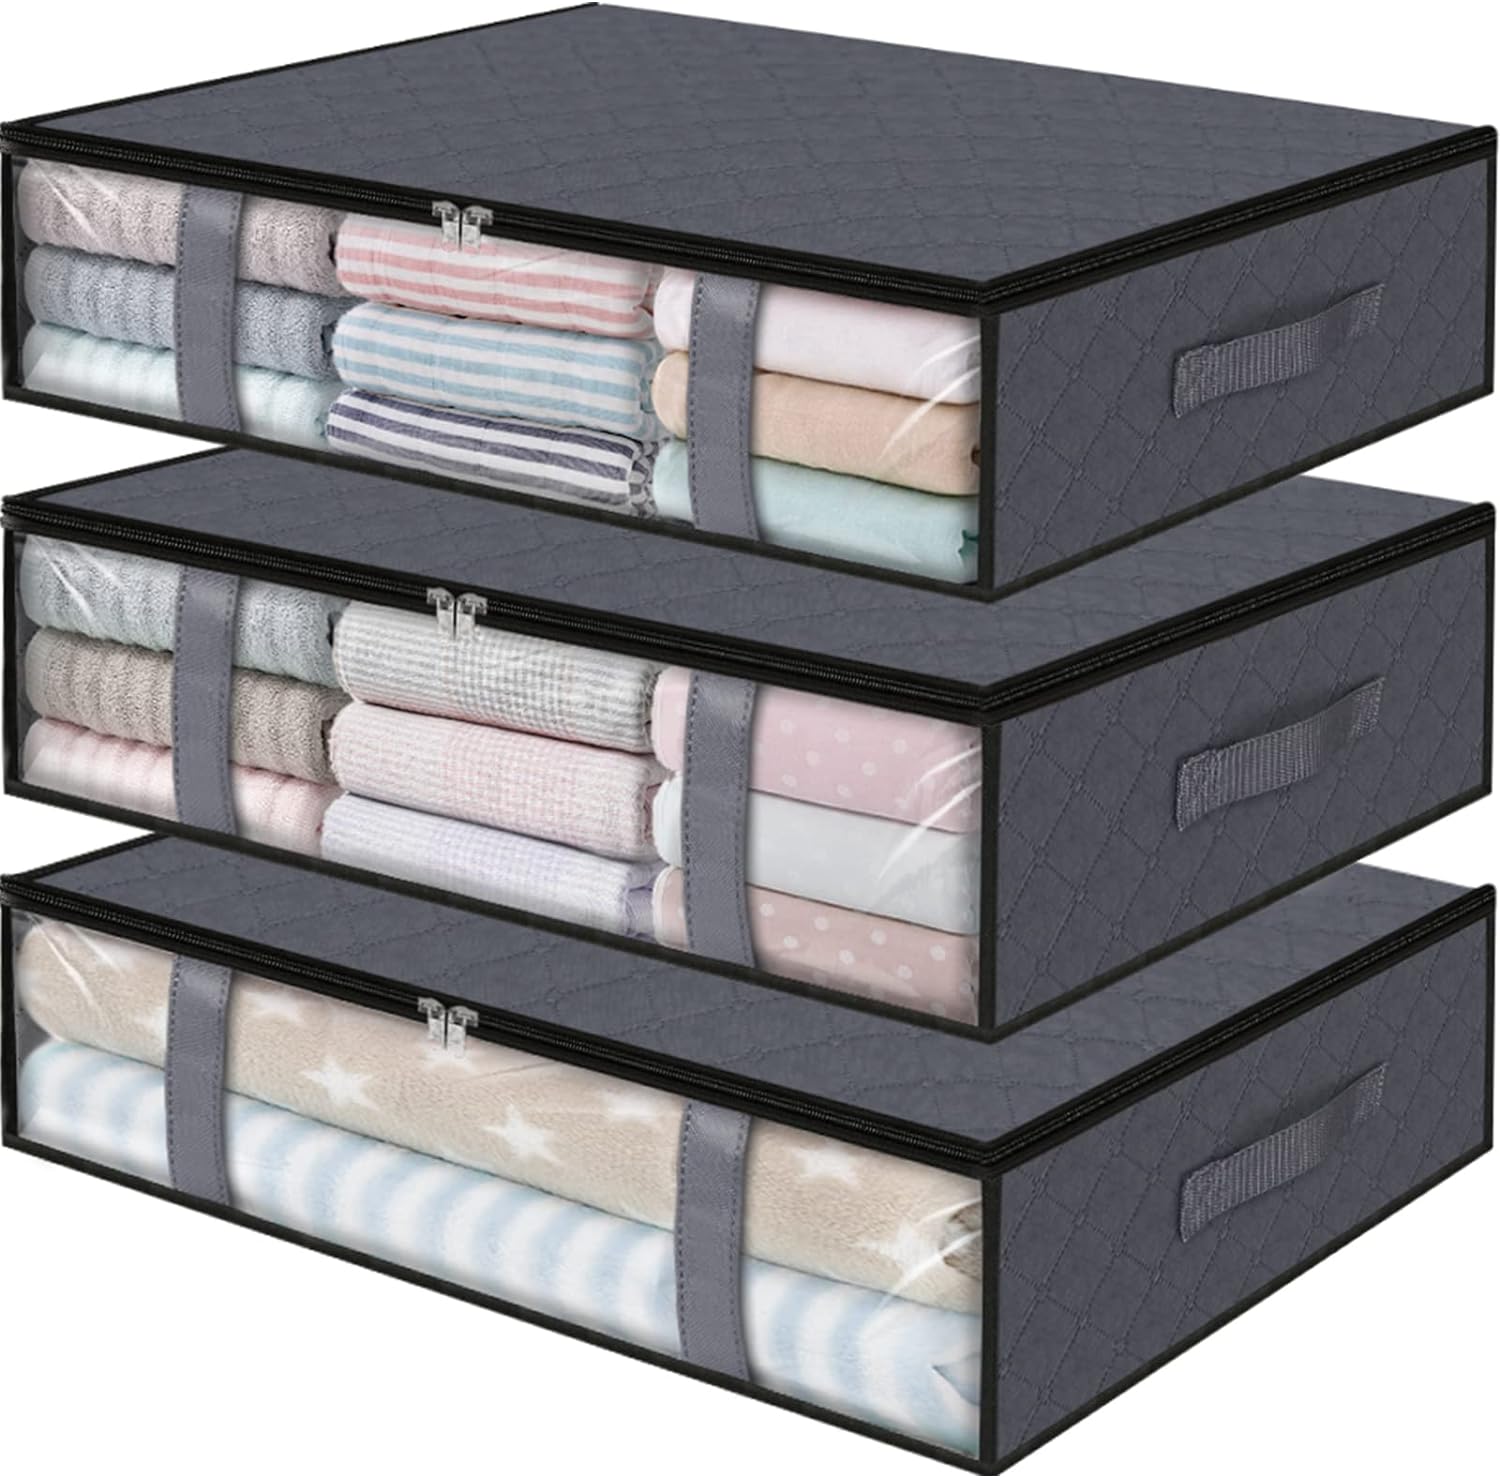 StorageRight Storage Bins,3-Pack Clothes Storage, Foldable Blanket Storage Bags, Under Bed Storage Containers for Organizing, Clothing, Bedroom, Comforter, Closet, Dorm, Quilts, Organizer,Grey